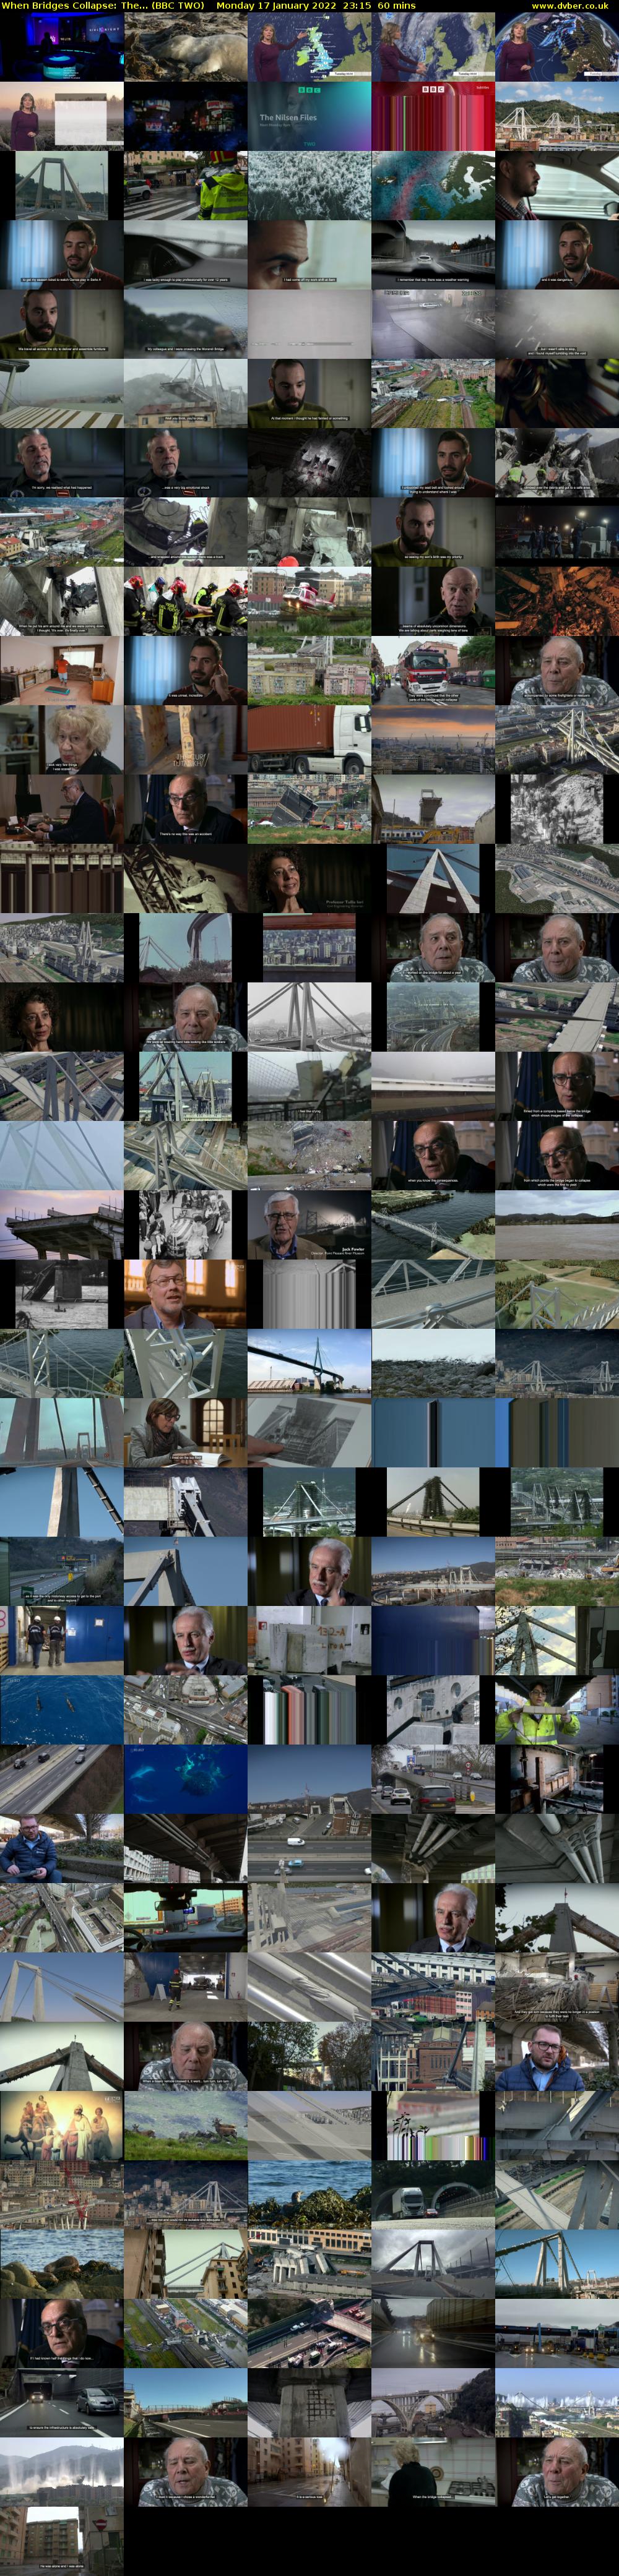 When Bridges Collapse: The... (BBC TWO) Monday 17 January 2022 23:15 - 00:15